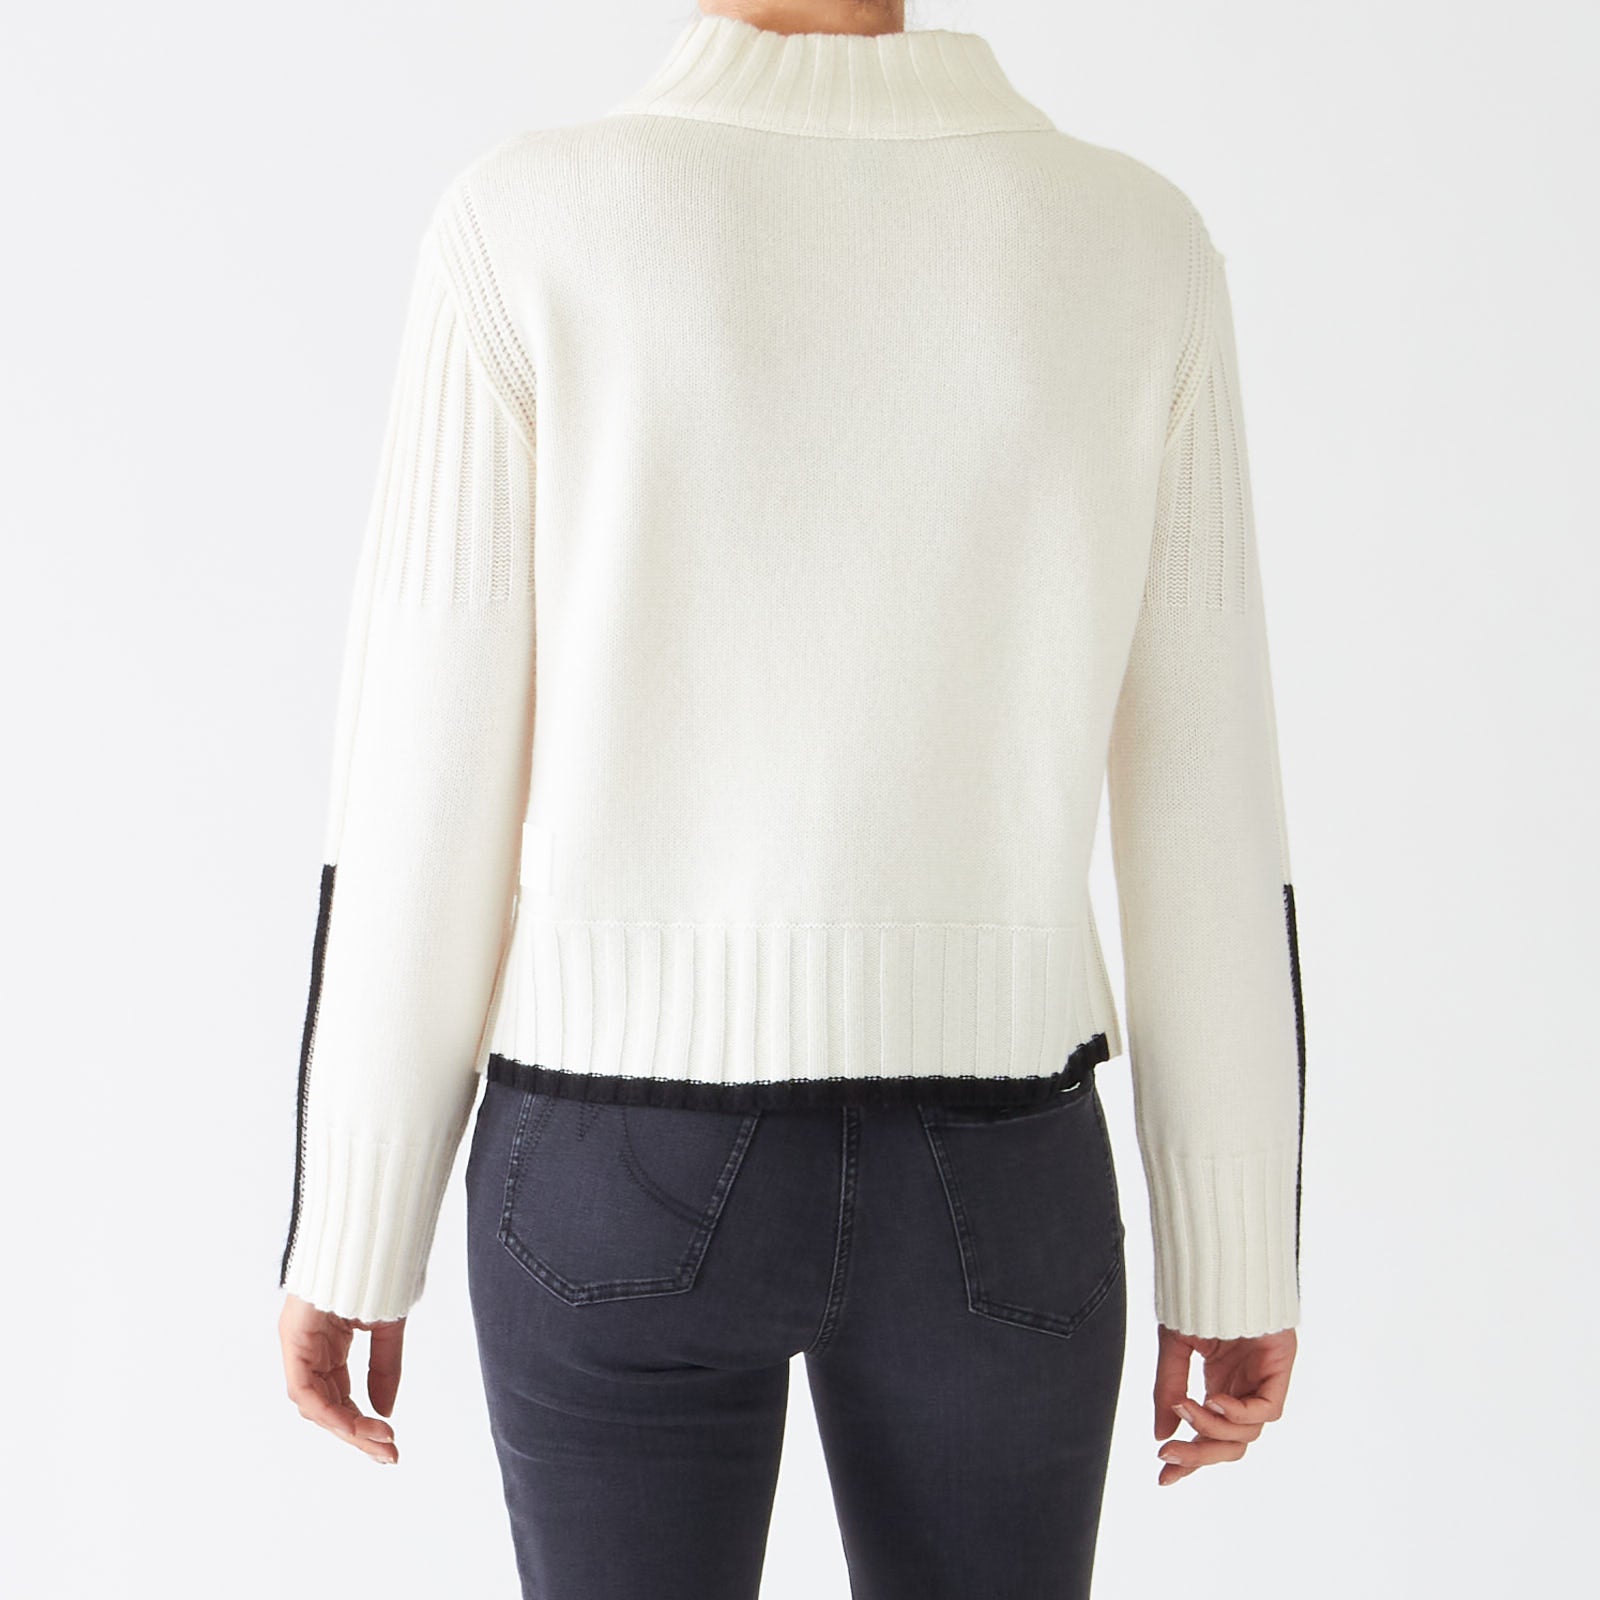 Off White Cashmere Blend Knit Sweater